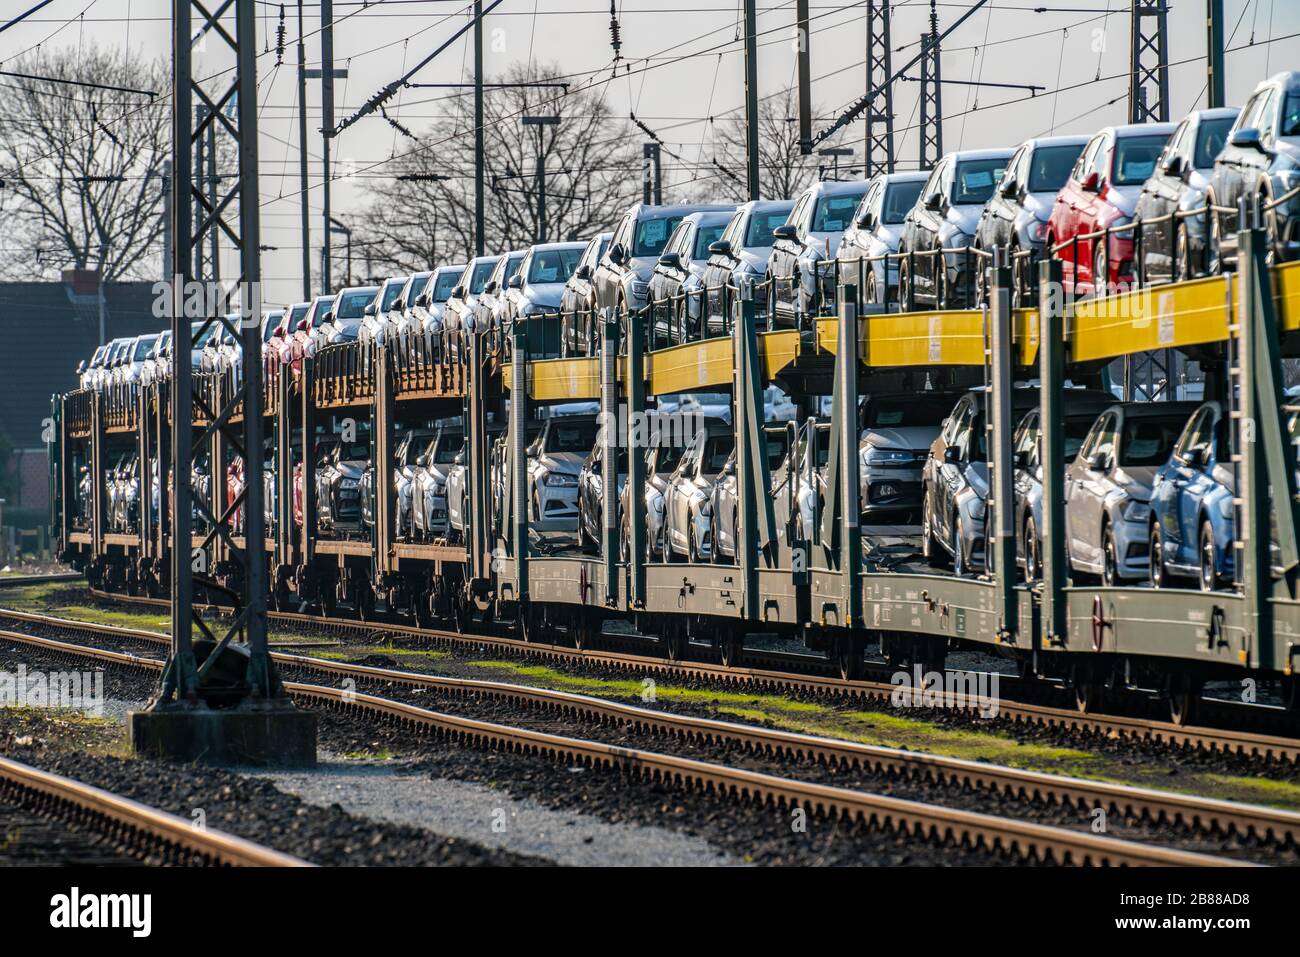 VW factory, Emden, new cars, car transporter, car train, freight train, with VW vehicles, Lower Saxony, Germany, Stock Photo